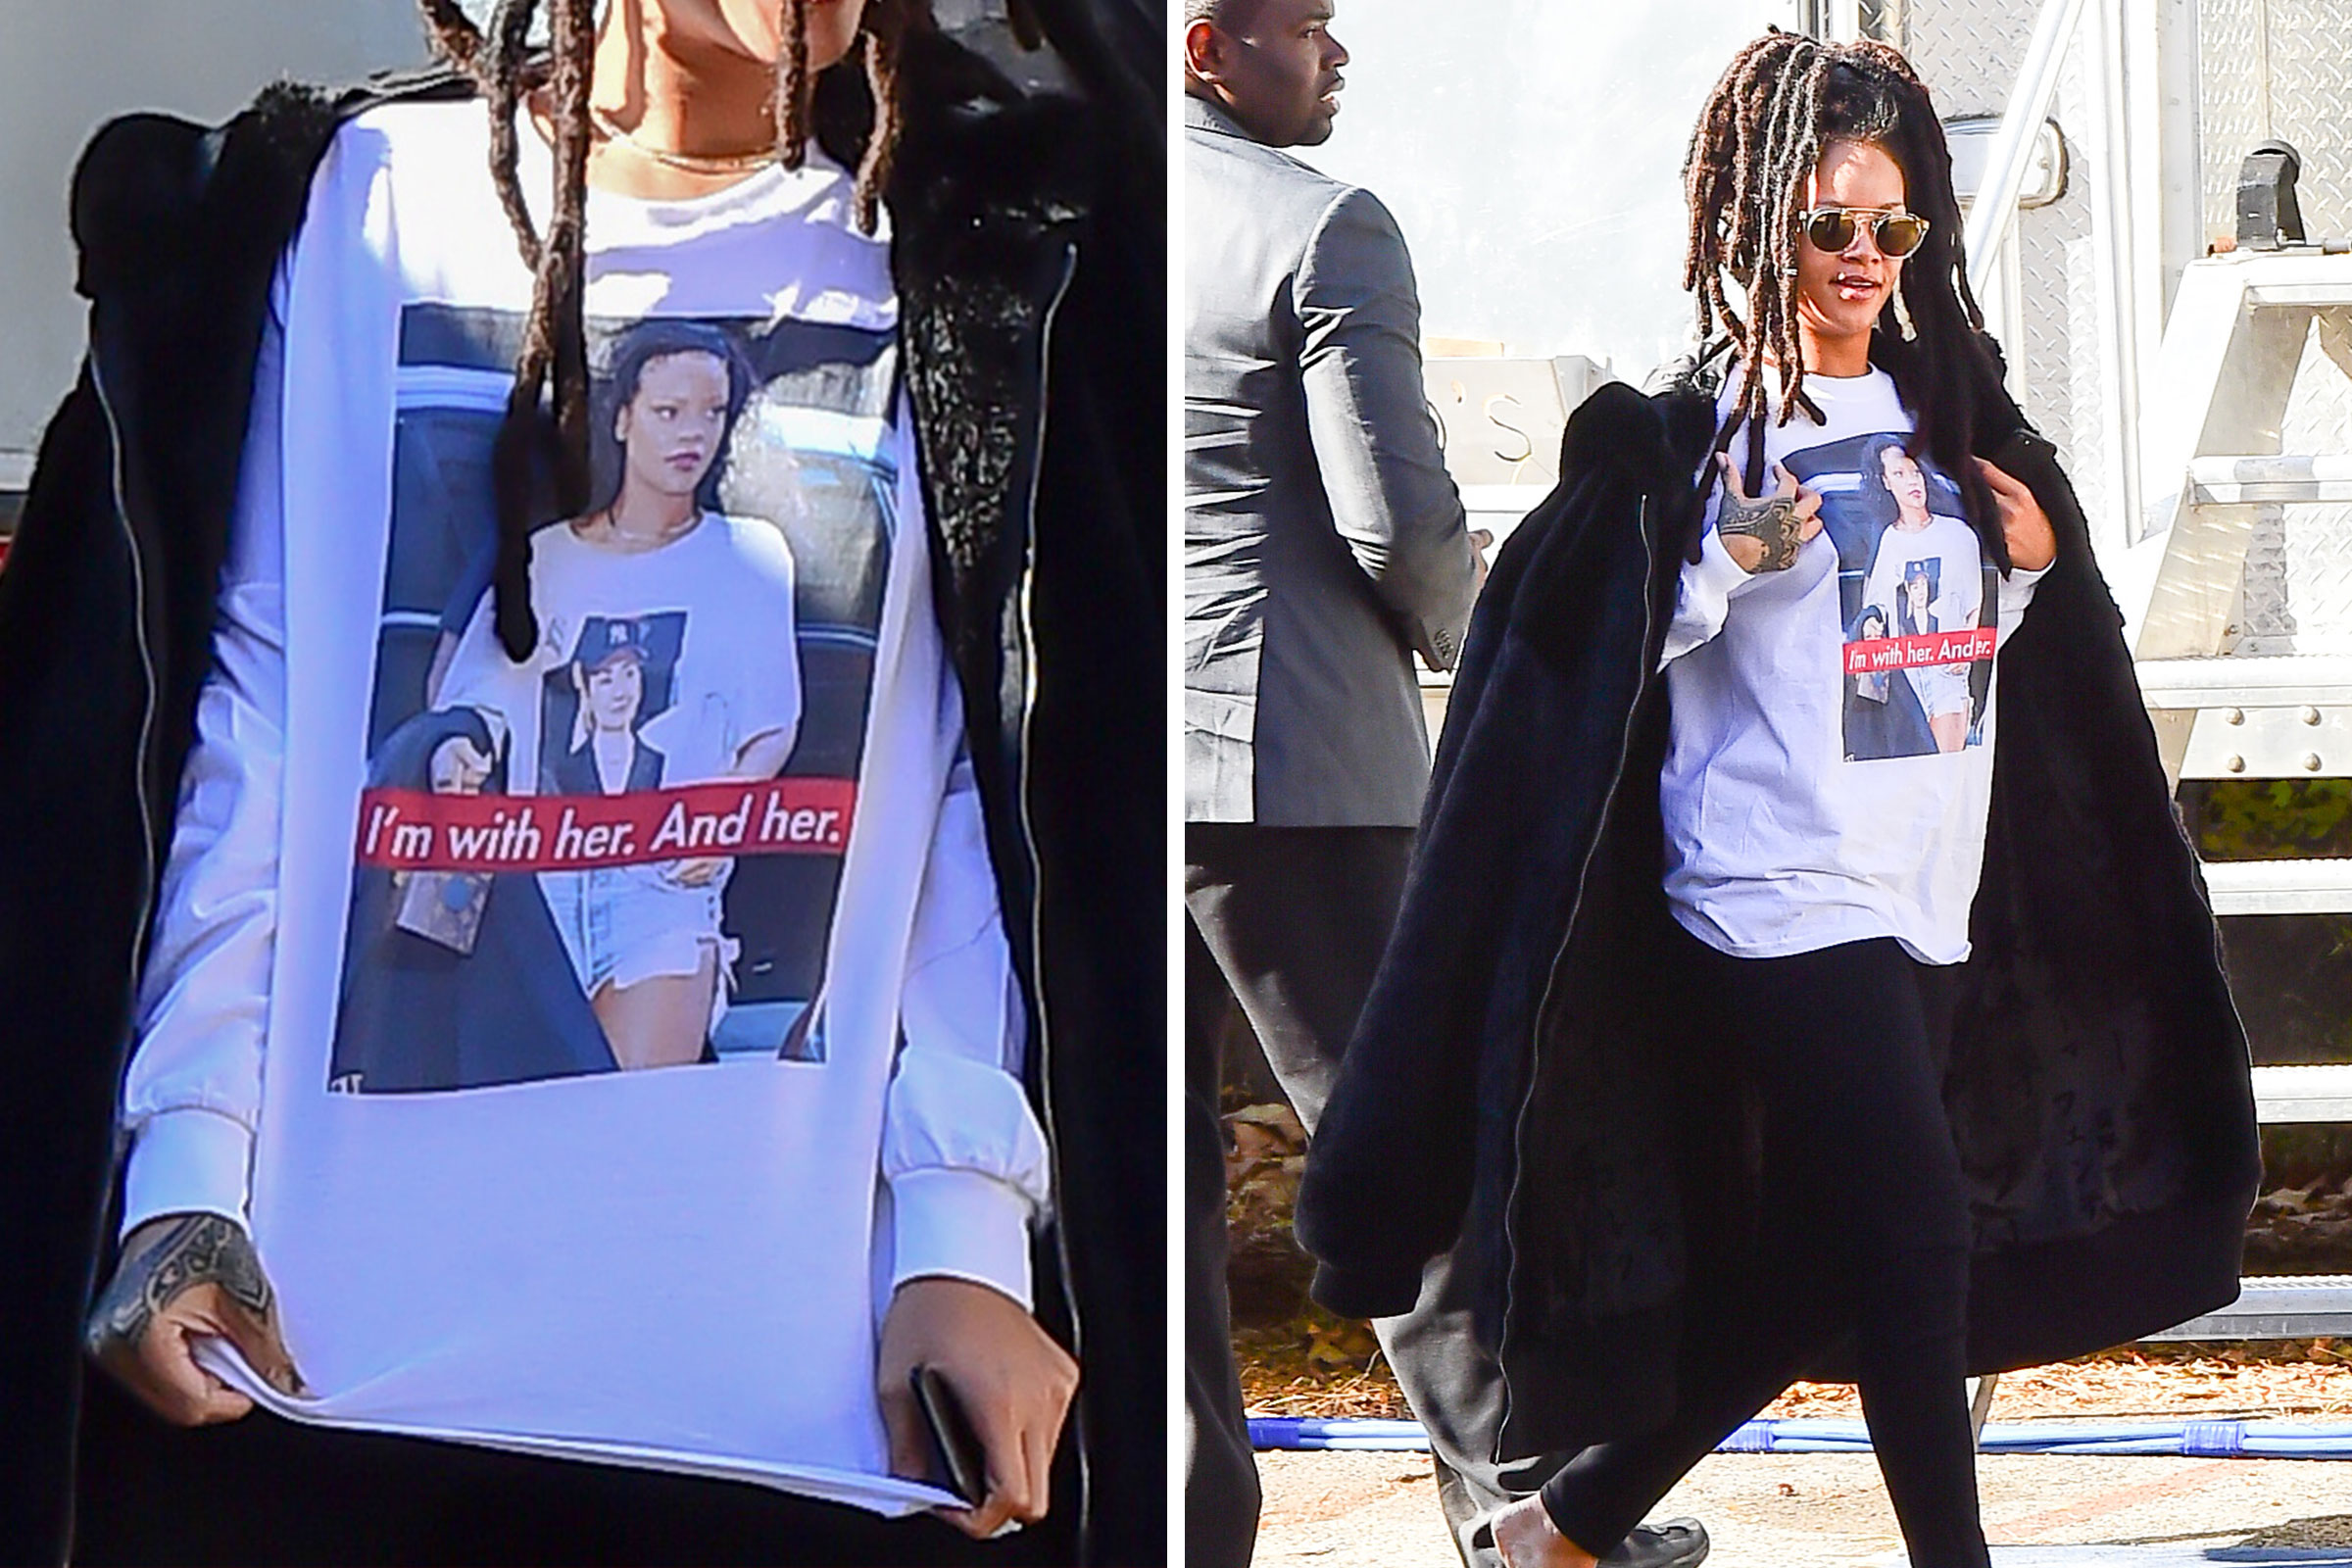 Rihanna arrived on "Ocean Eight" set in Brooklyn wearing a Hillary Clinton T-shirt on Nov. 8, 2016 (Raymond Hall—GC Images/Getty Images (2))